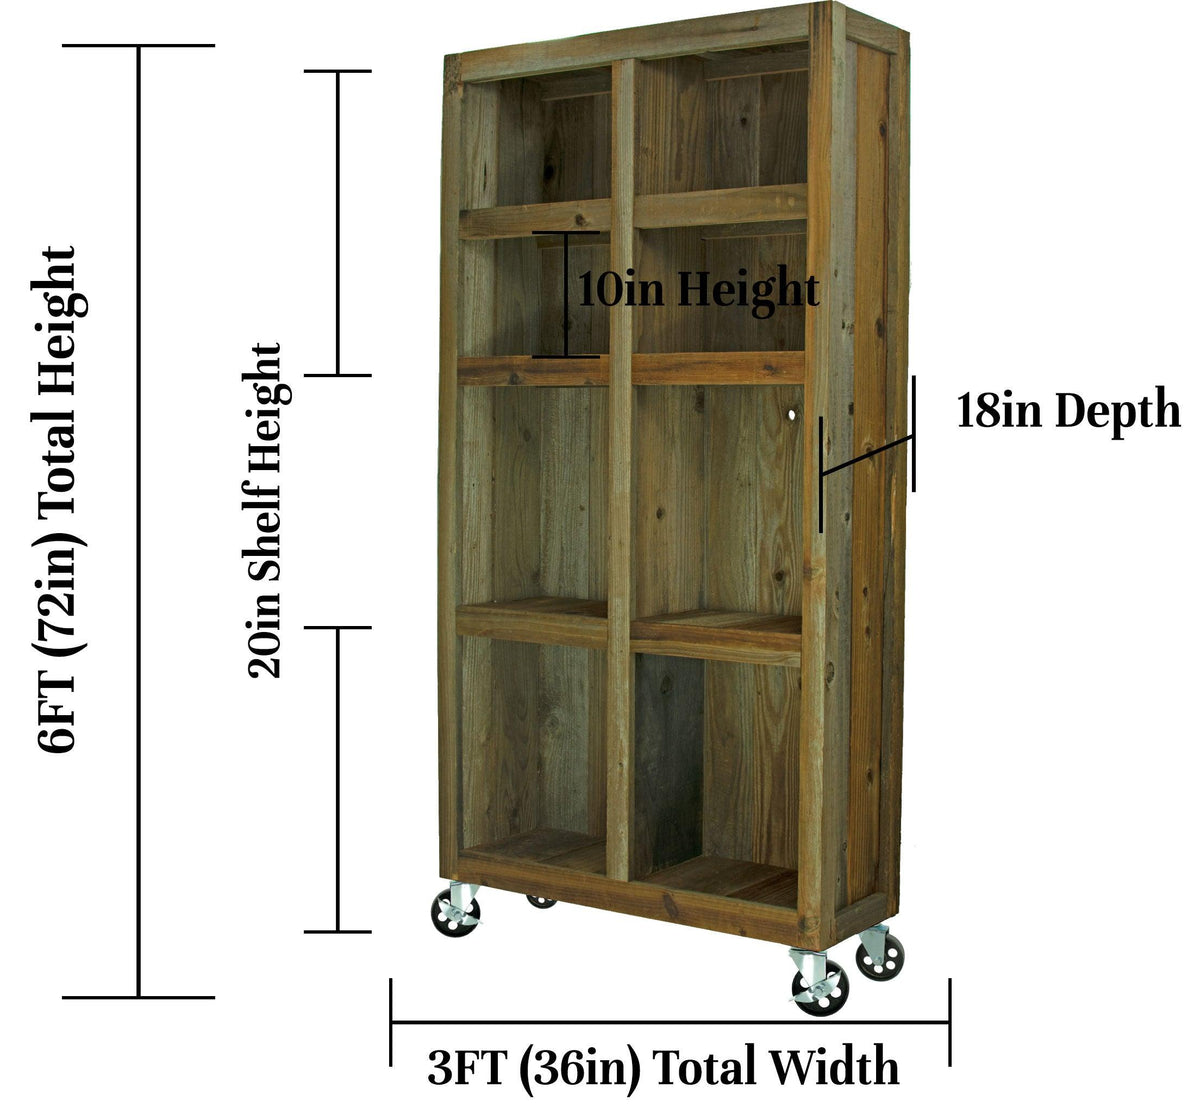 Dimensions of Lee Display's brand new Outdoor Rolling Redwood Storage Cabinet with Wheels. Shelving Unit with 5in Galvanized Steel Casters on sale at leedisplay.com